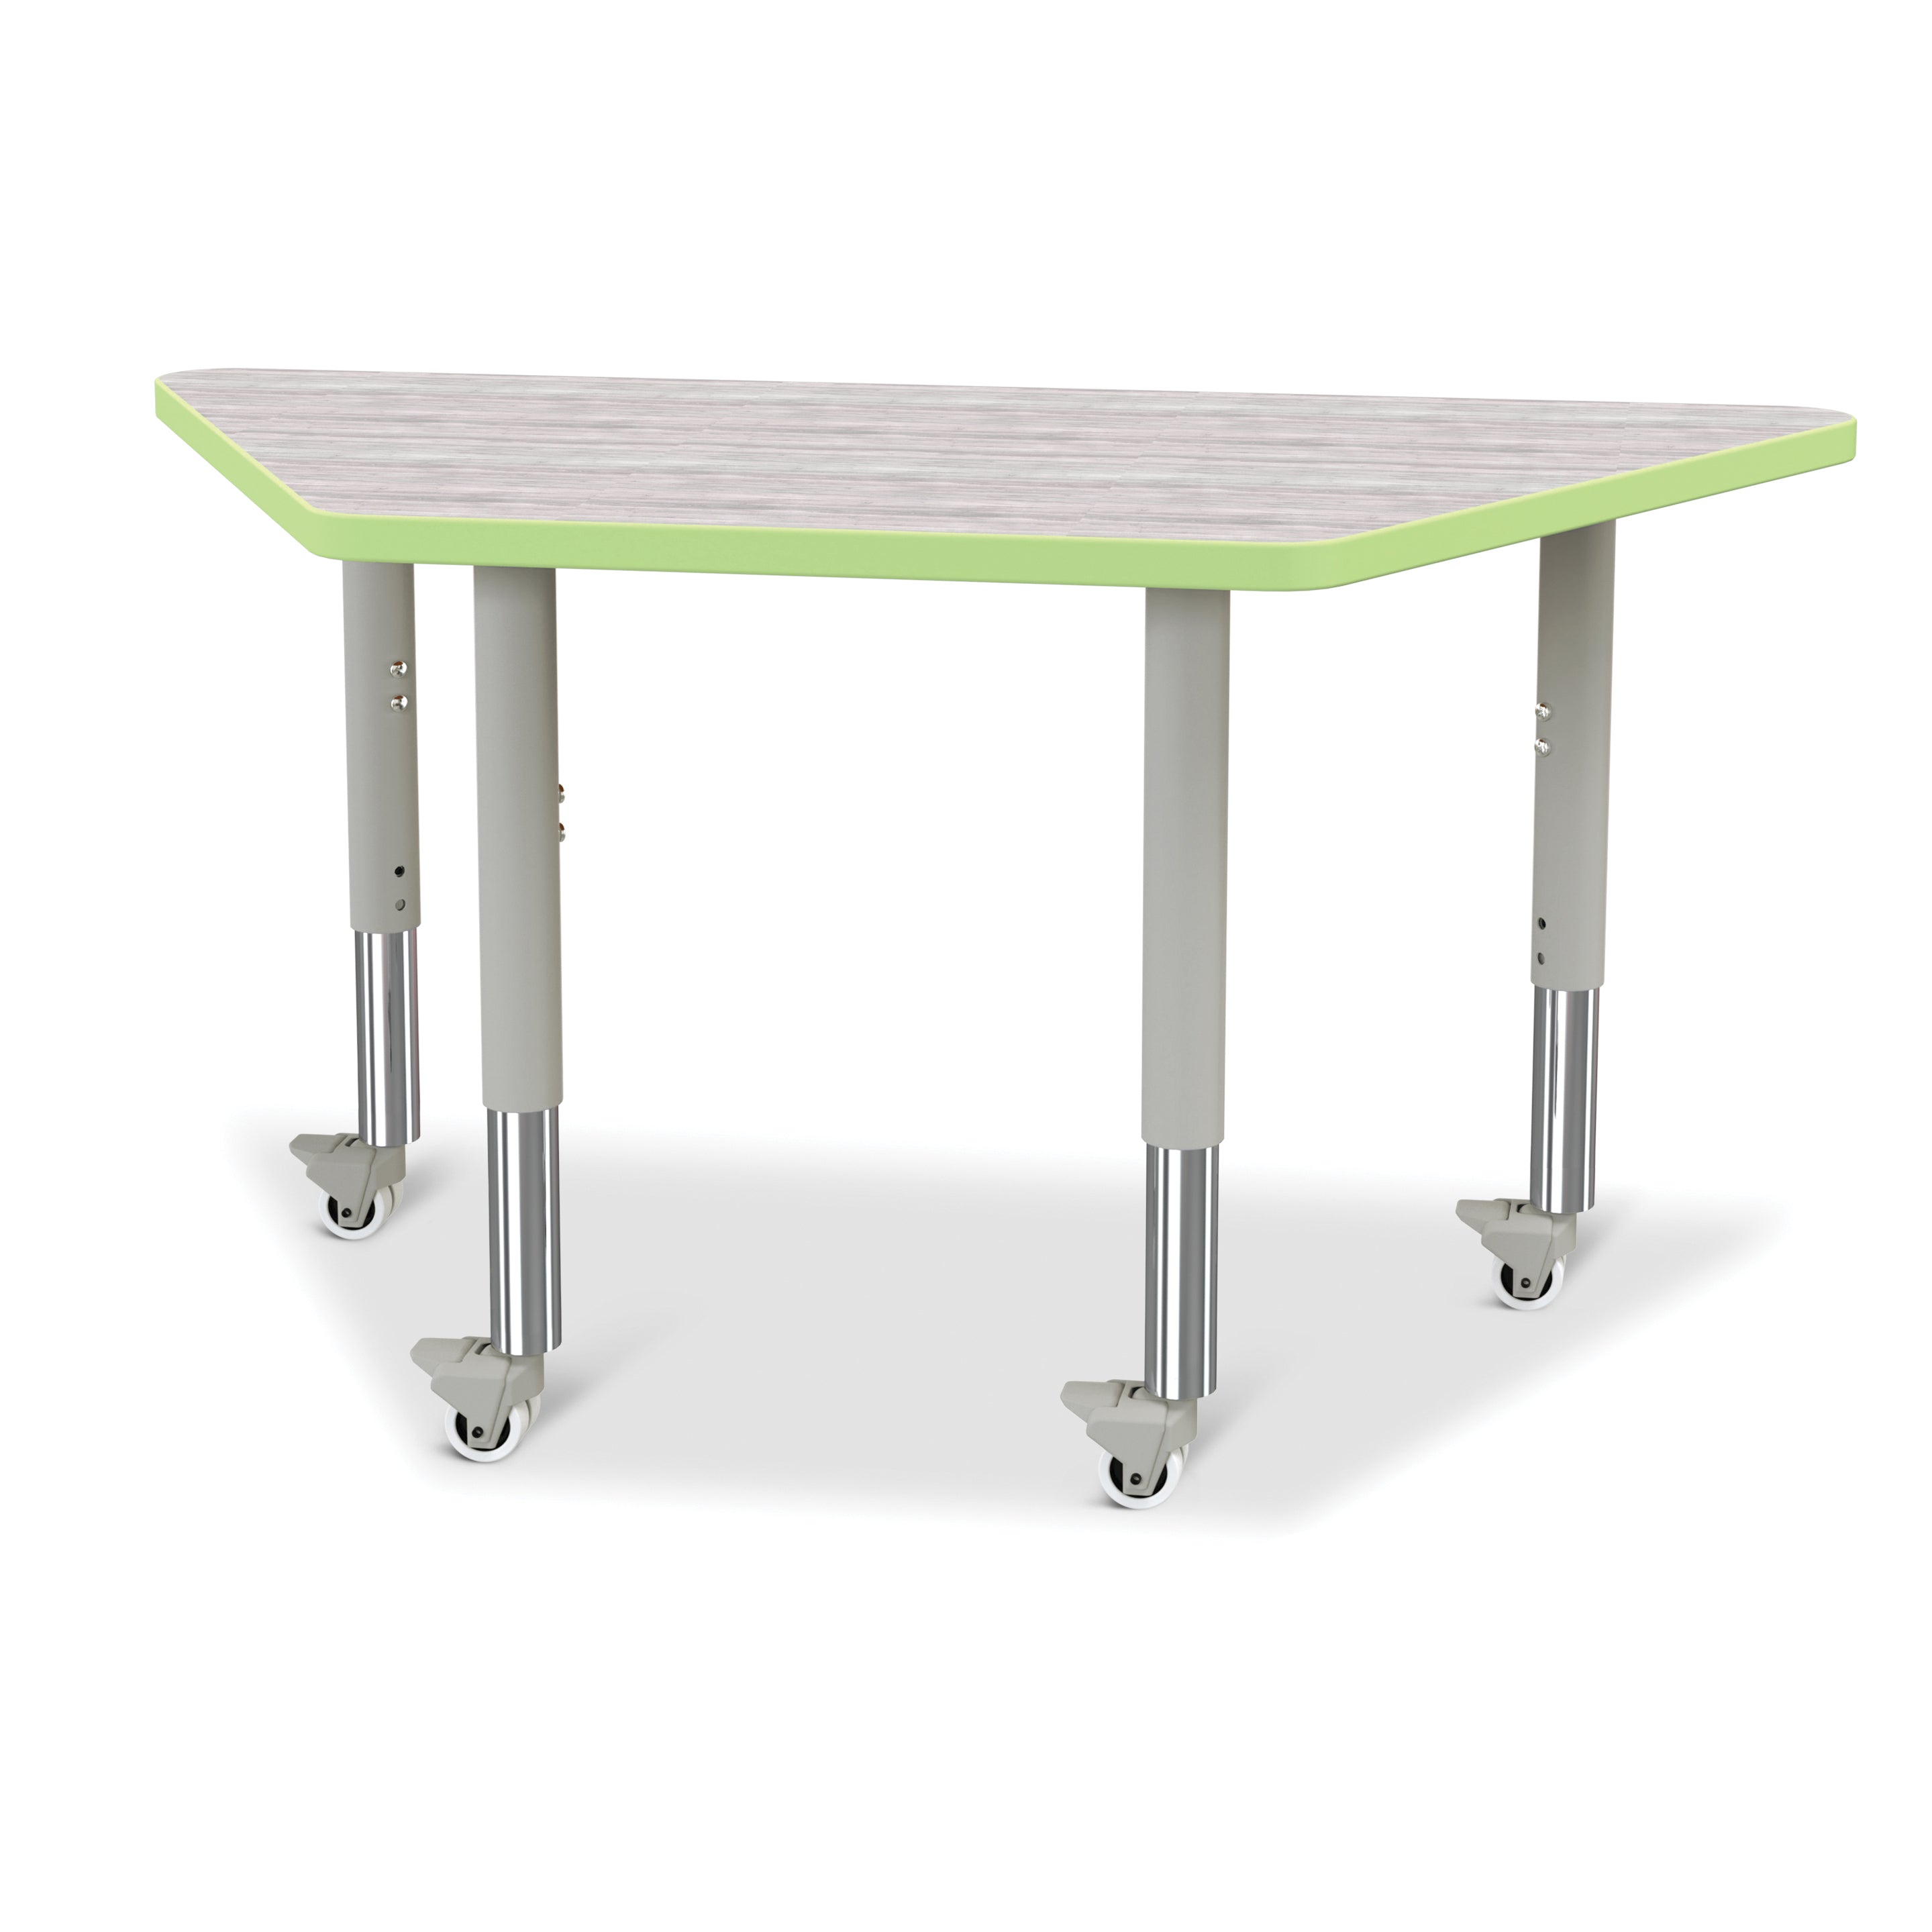 6438JCM451, Berries Trapezoid Activity Table - 24" X 48", Mobile - Driftwood Gray/Key Lime/Gray